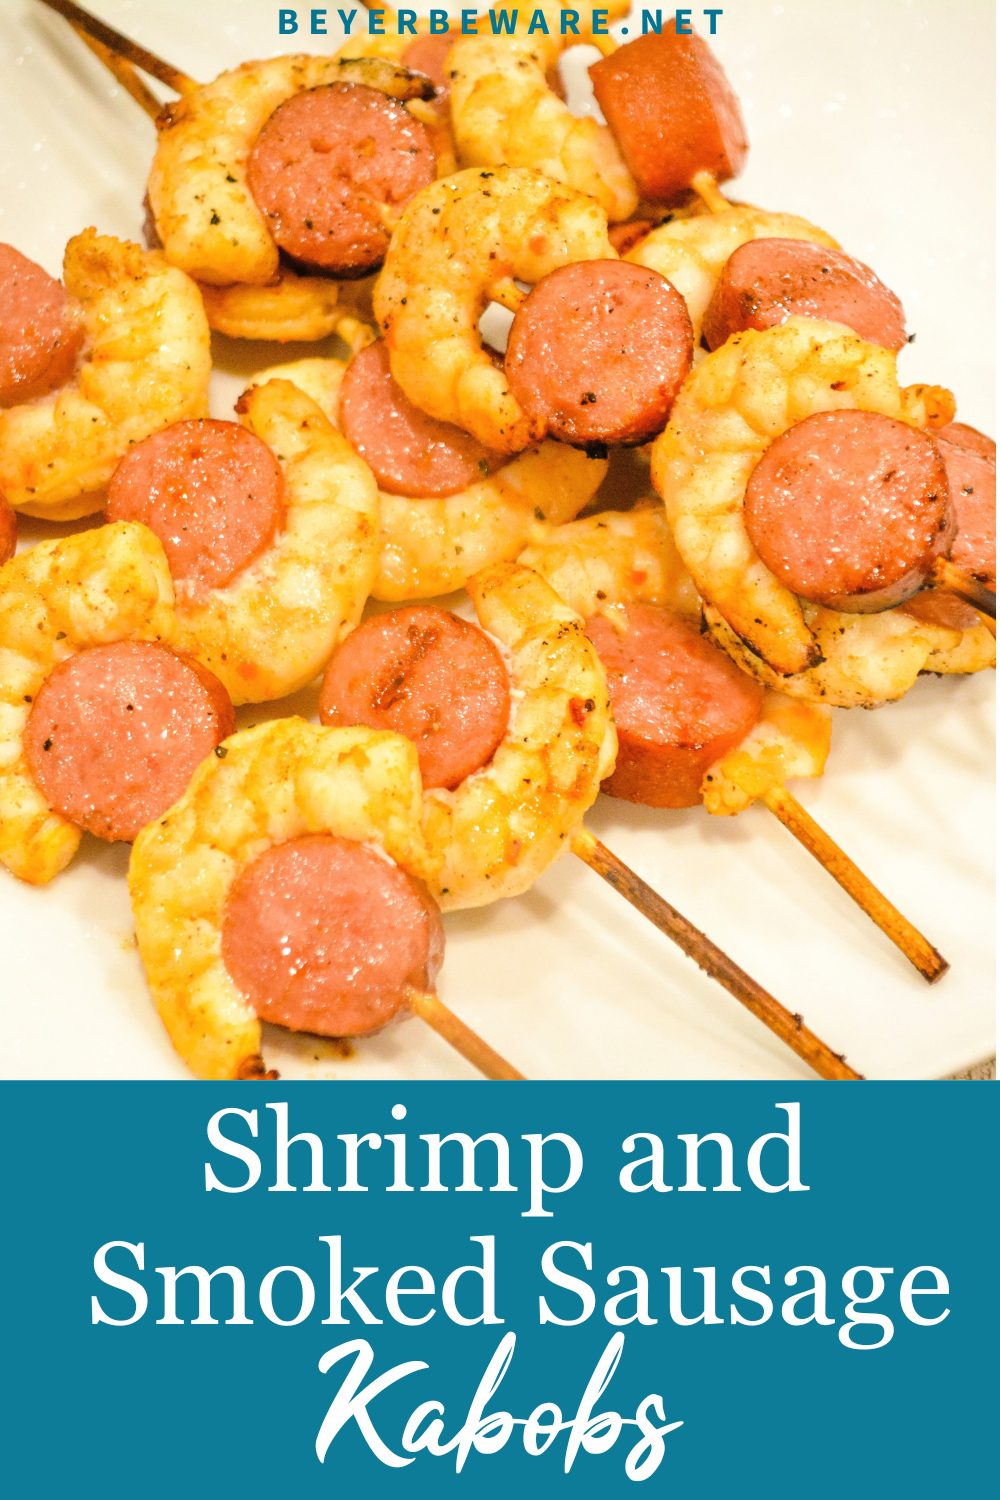  Grilled shrimp kabobs with smoked sausage are full of cajun flavors and grill quickly for a fast grilled shrimp and smoked sausage skewers meal.